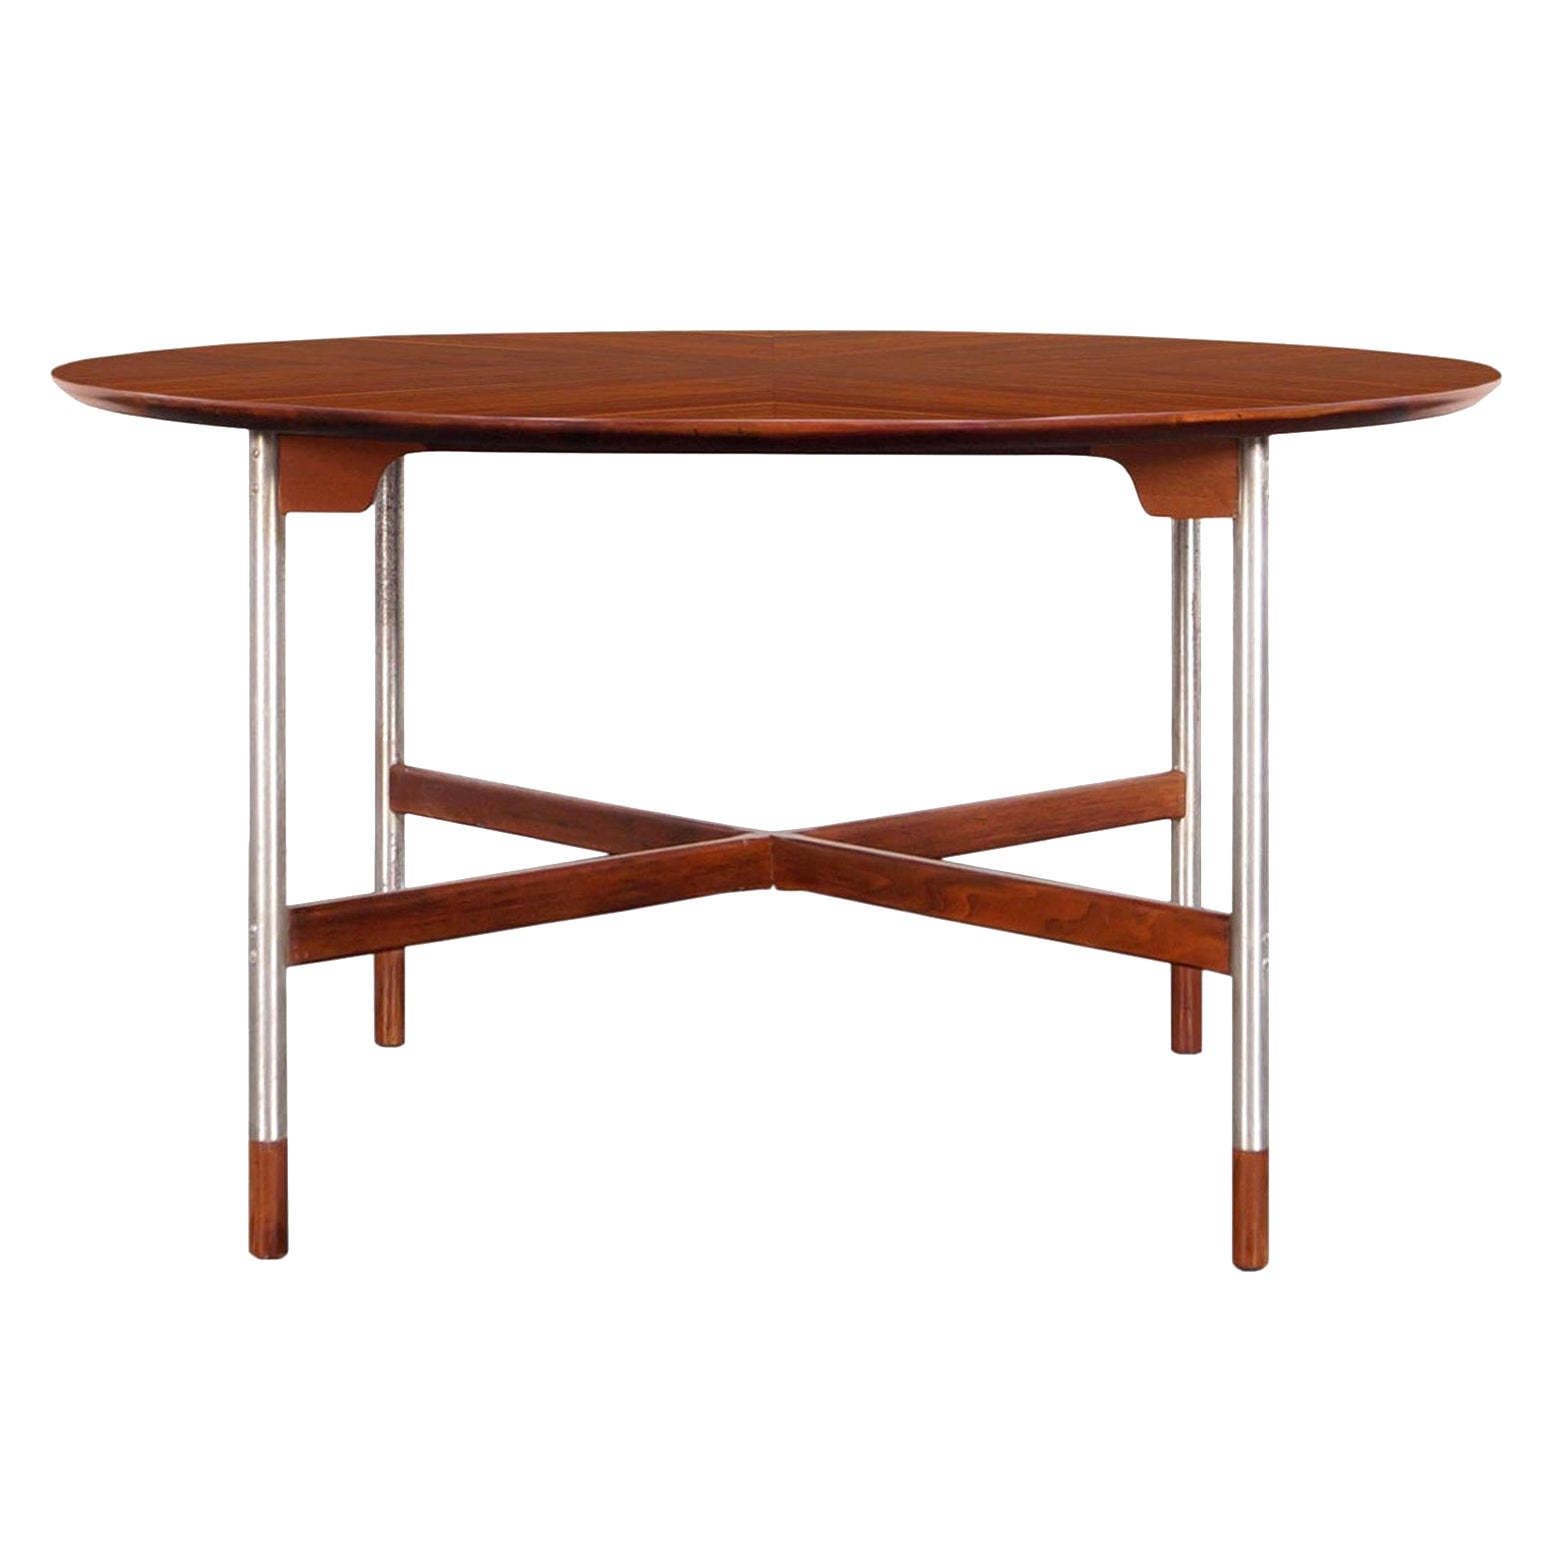 Midcentury Walnut and Brushed Steel Table by Jack Cartwright For Sale